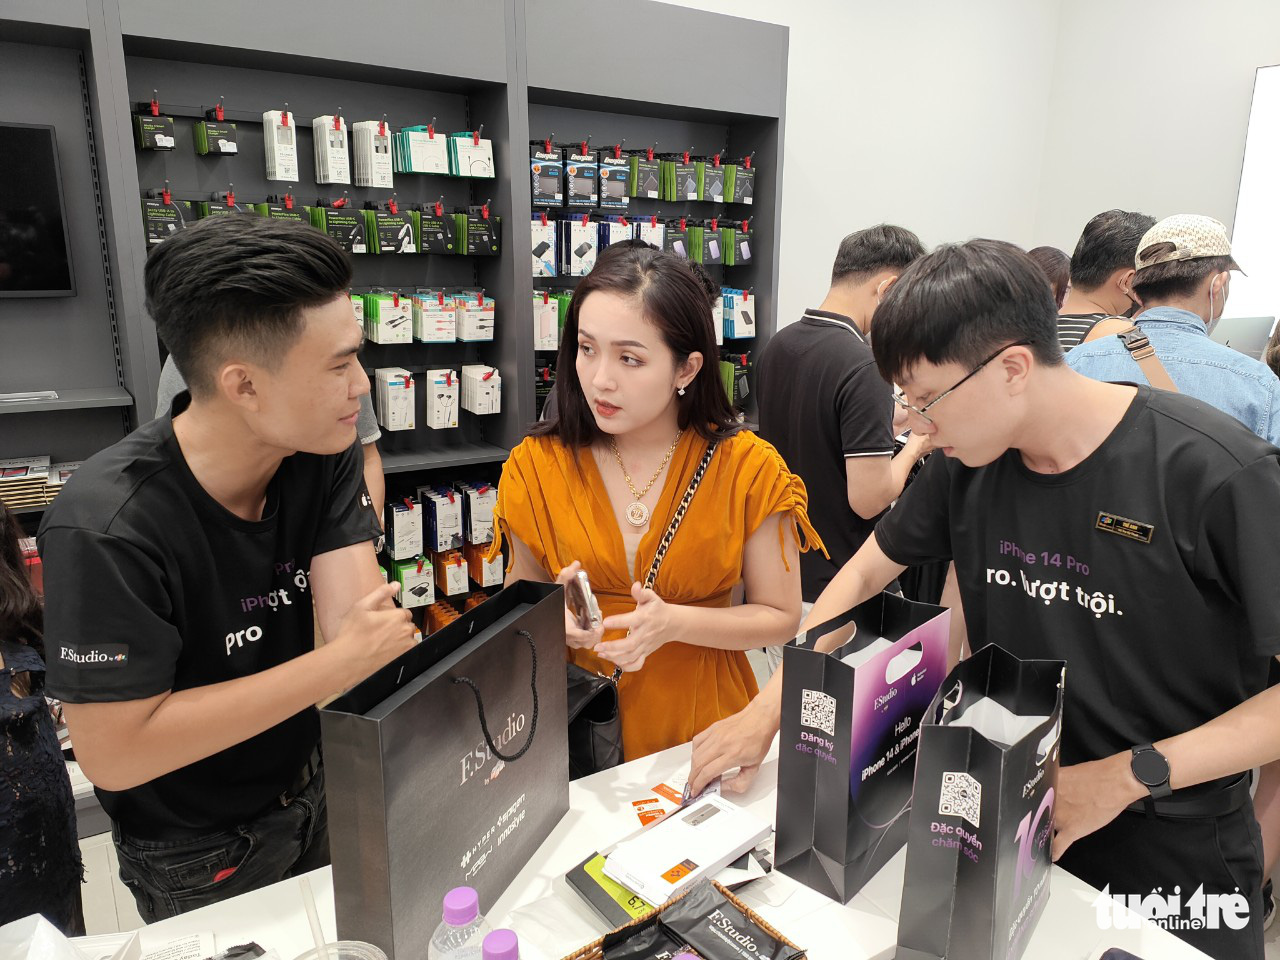 Early birds receive the new iPhone 14s at an FPT Shop outlet in Ho Chi Minh City, October 14, 2022. Photo: Duc Thien / Tuoi Tre